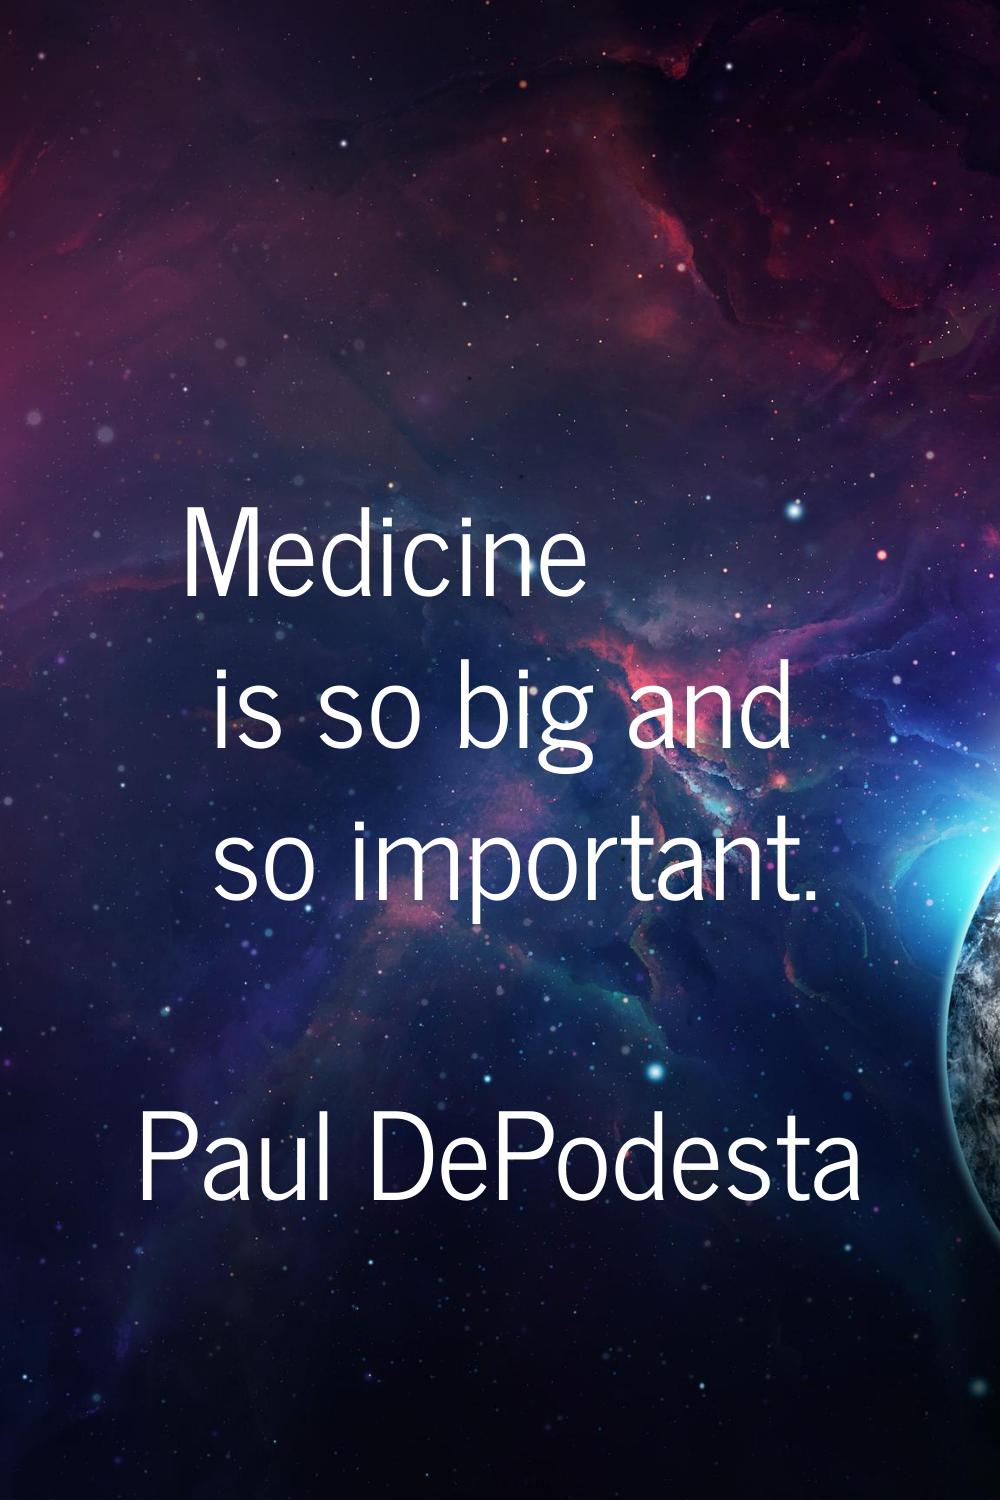 Medicine is so big and so important.